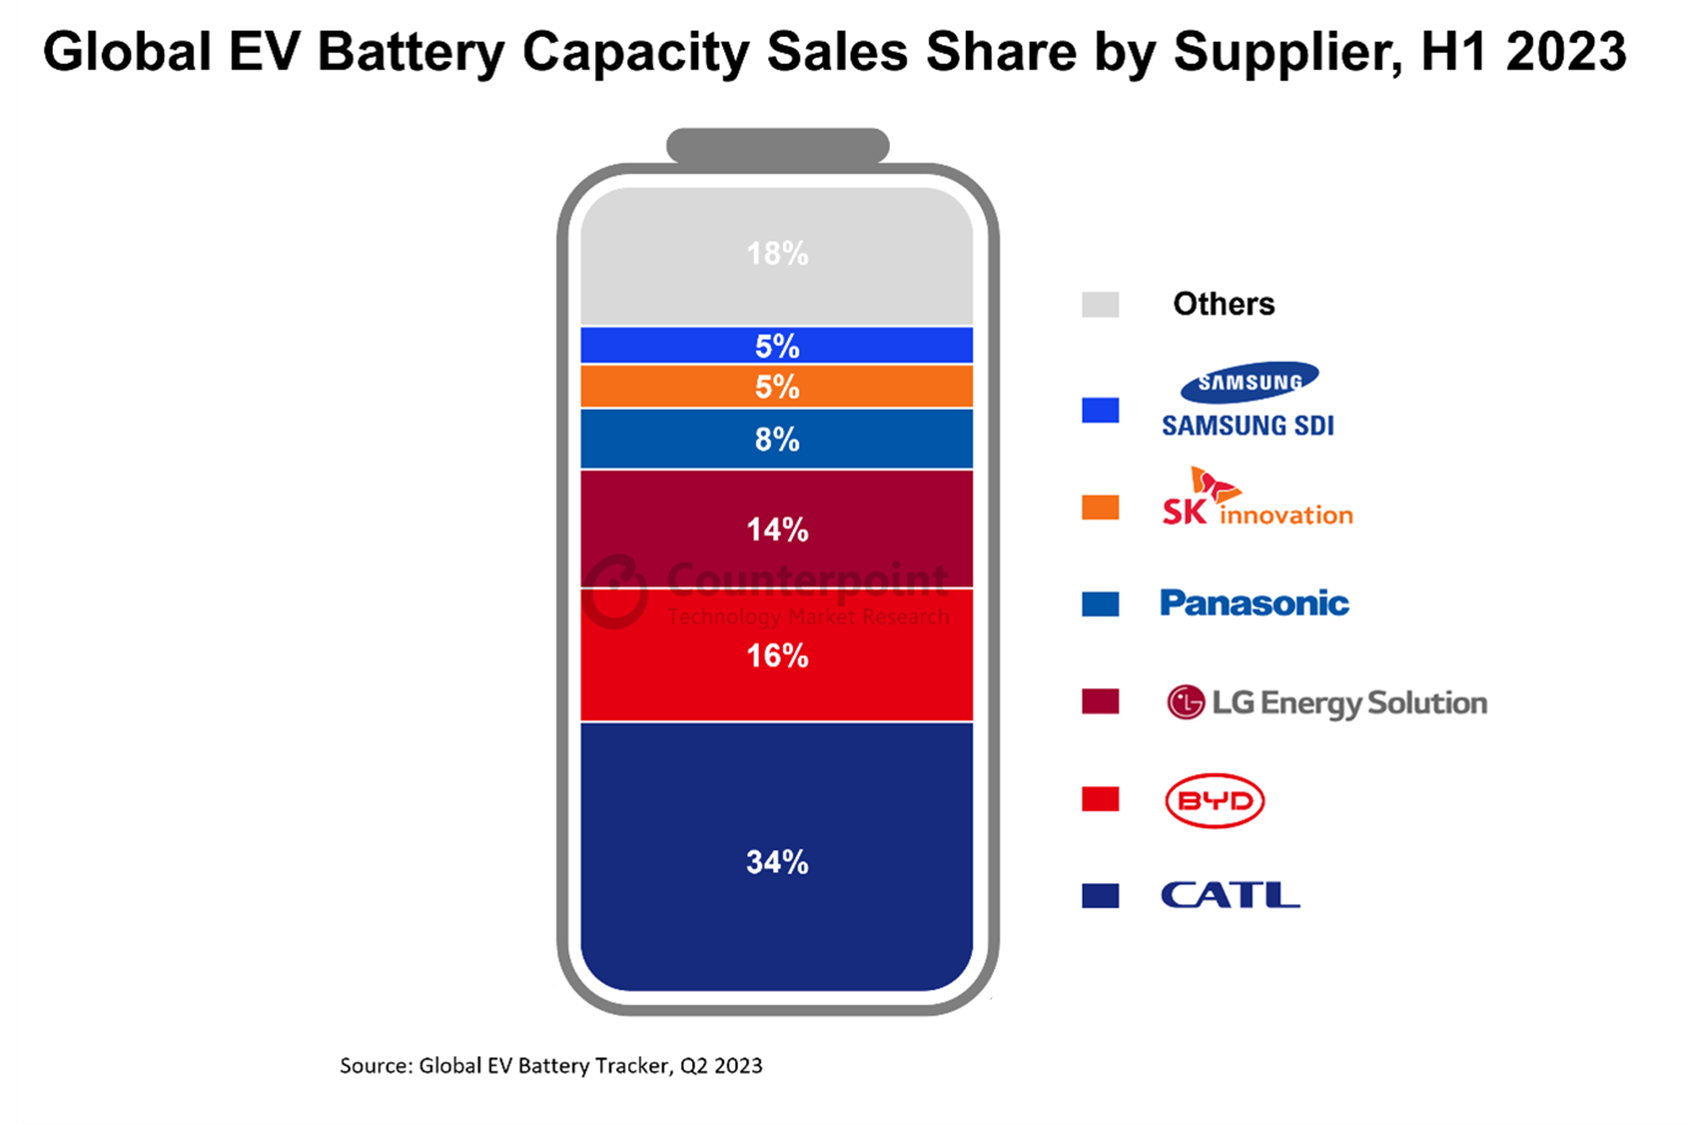 Counterpoint Research Global EV Battery Capacity Sales Share by Supplier H1 2023